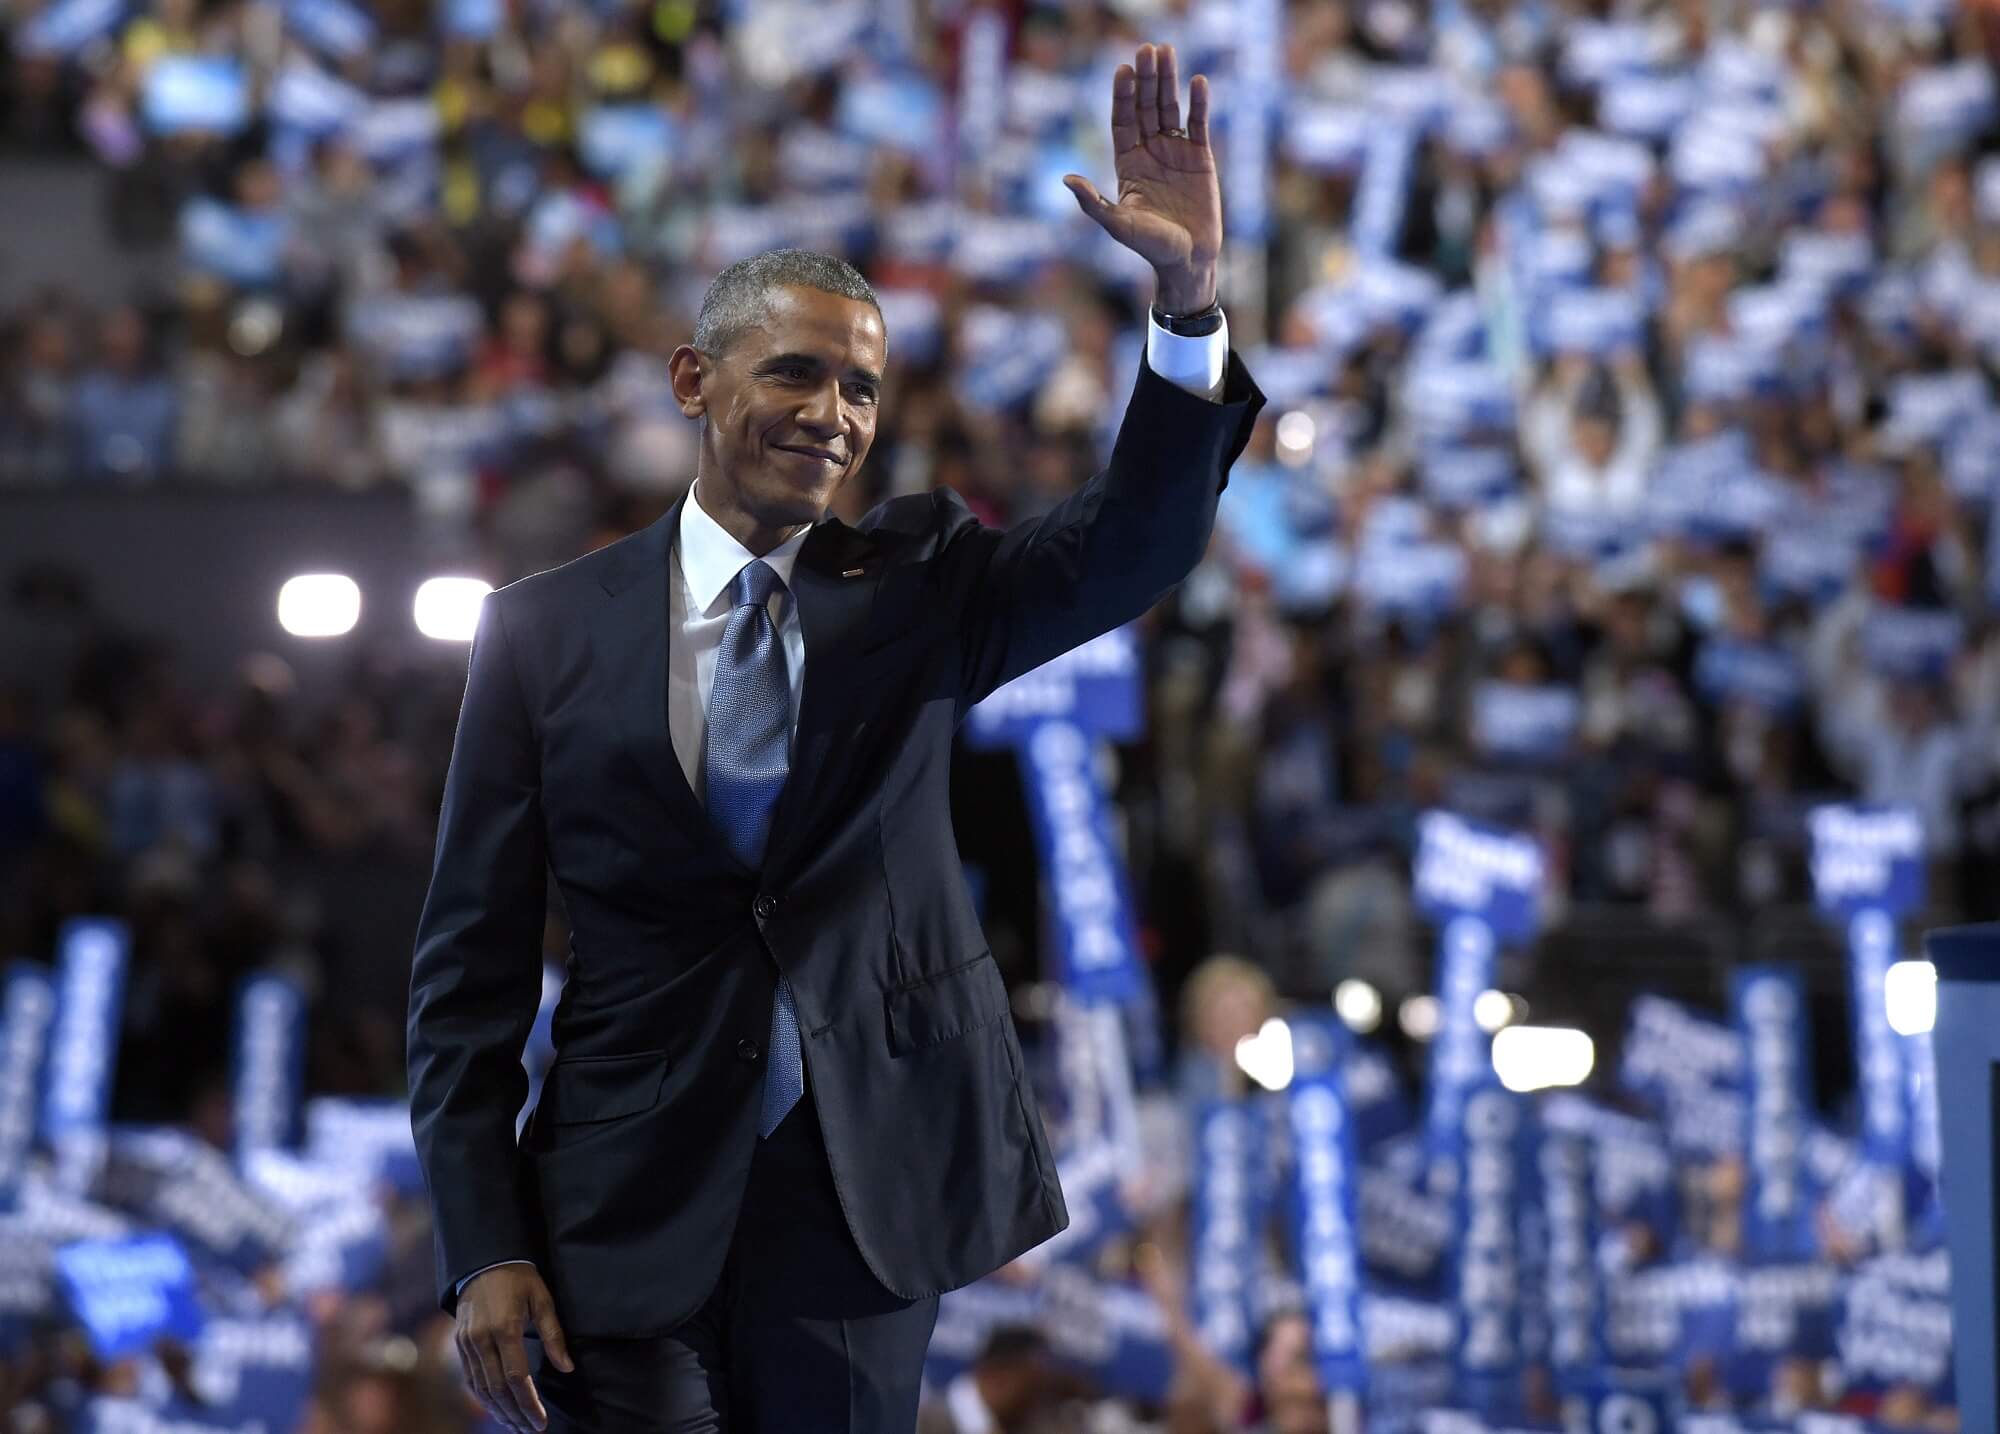 President Barack Obama waves to the crowd after speaking at the Democratic National Convention in Philadelphia, Wednesday, July 27, 2016. (AP Photo/Susan Walsh)